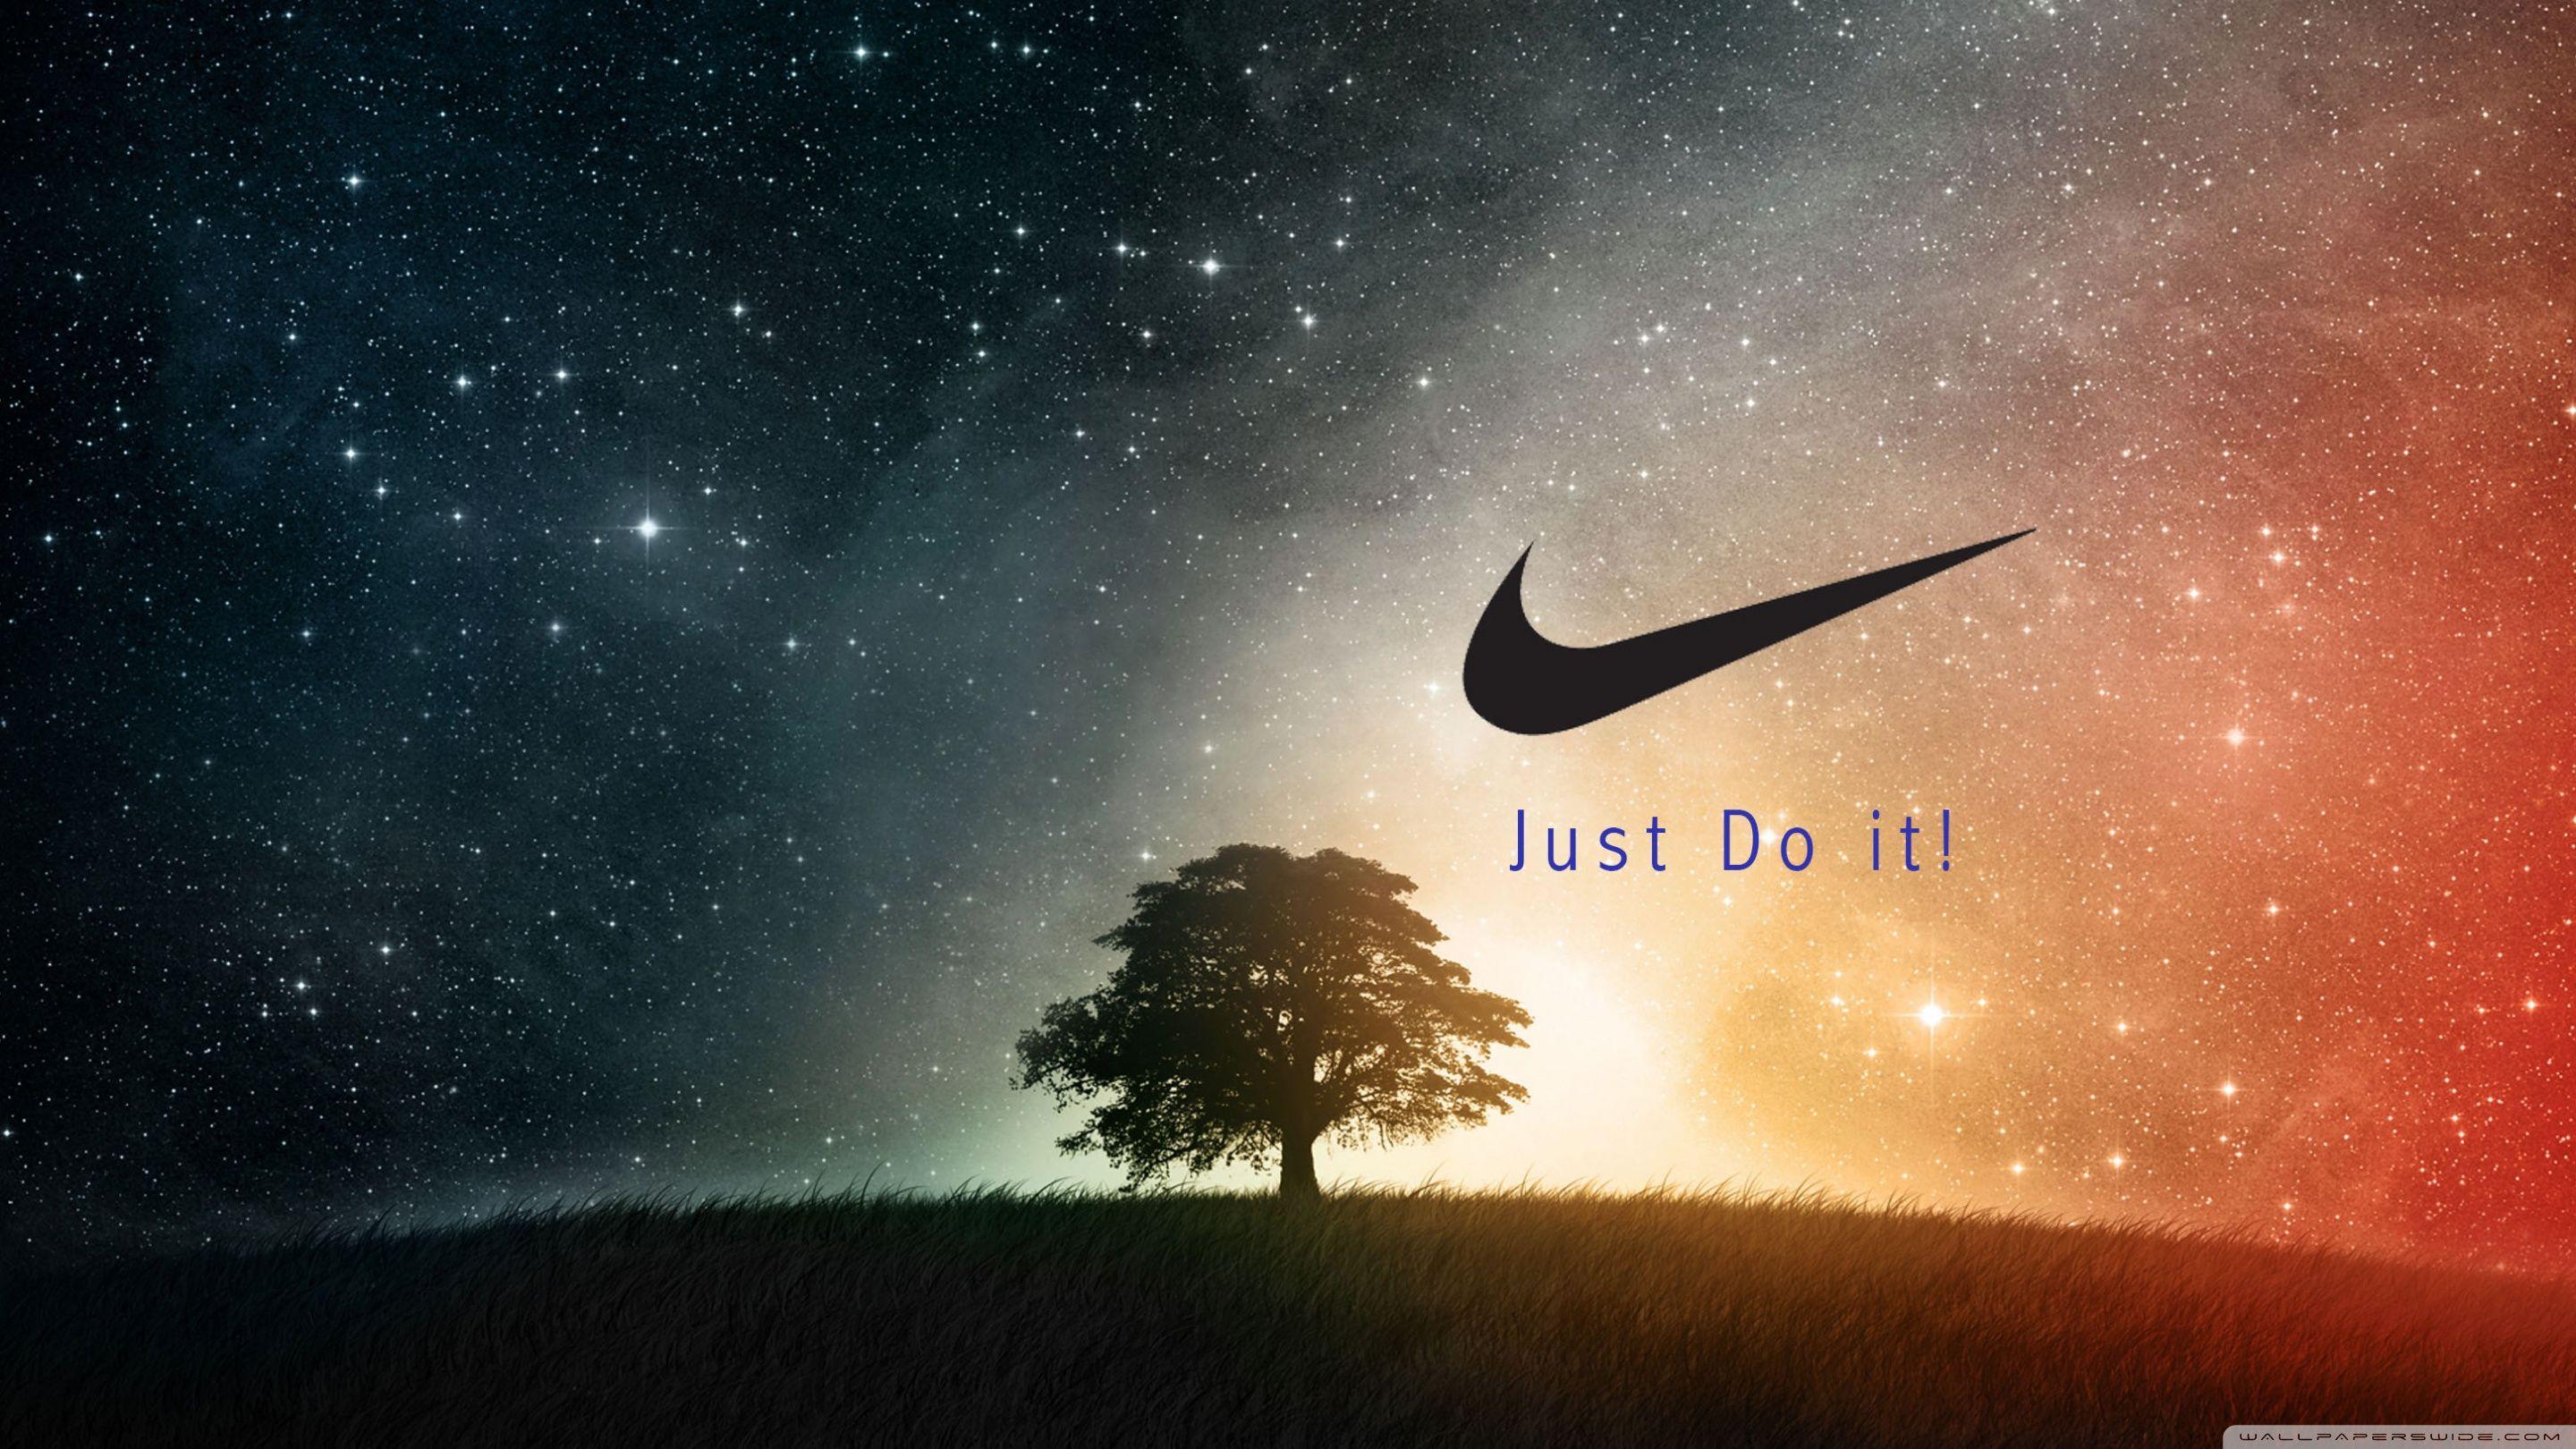 Access to Thousands of Awesome Free HD Wallpapers | Nike wallpaper, Nike  logo wallpapers, Wallpaper iphone neon